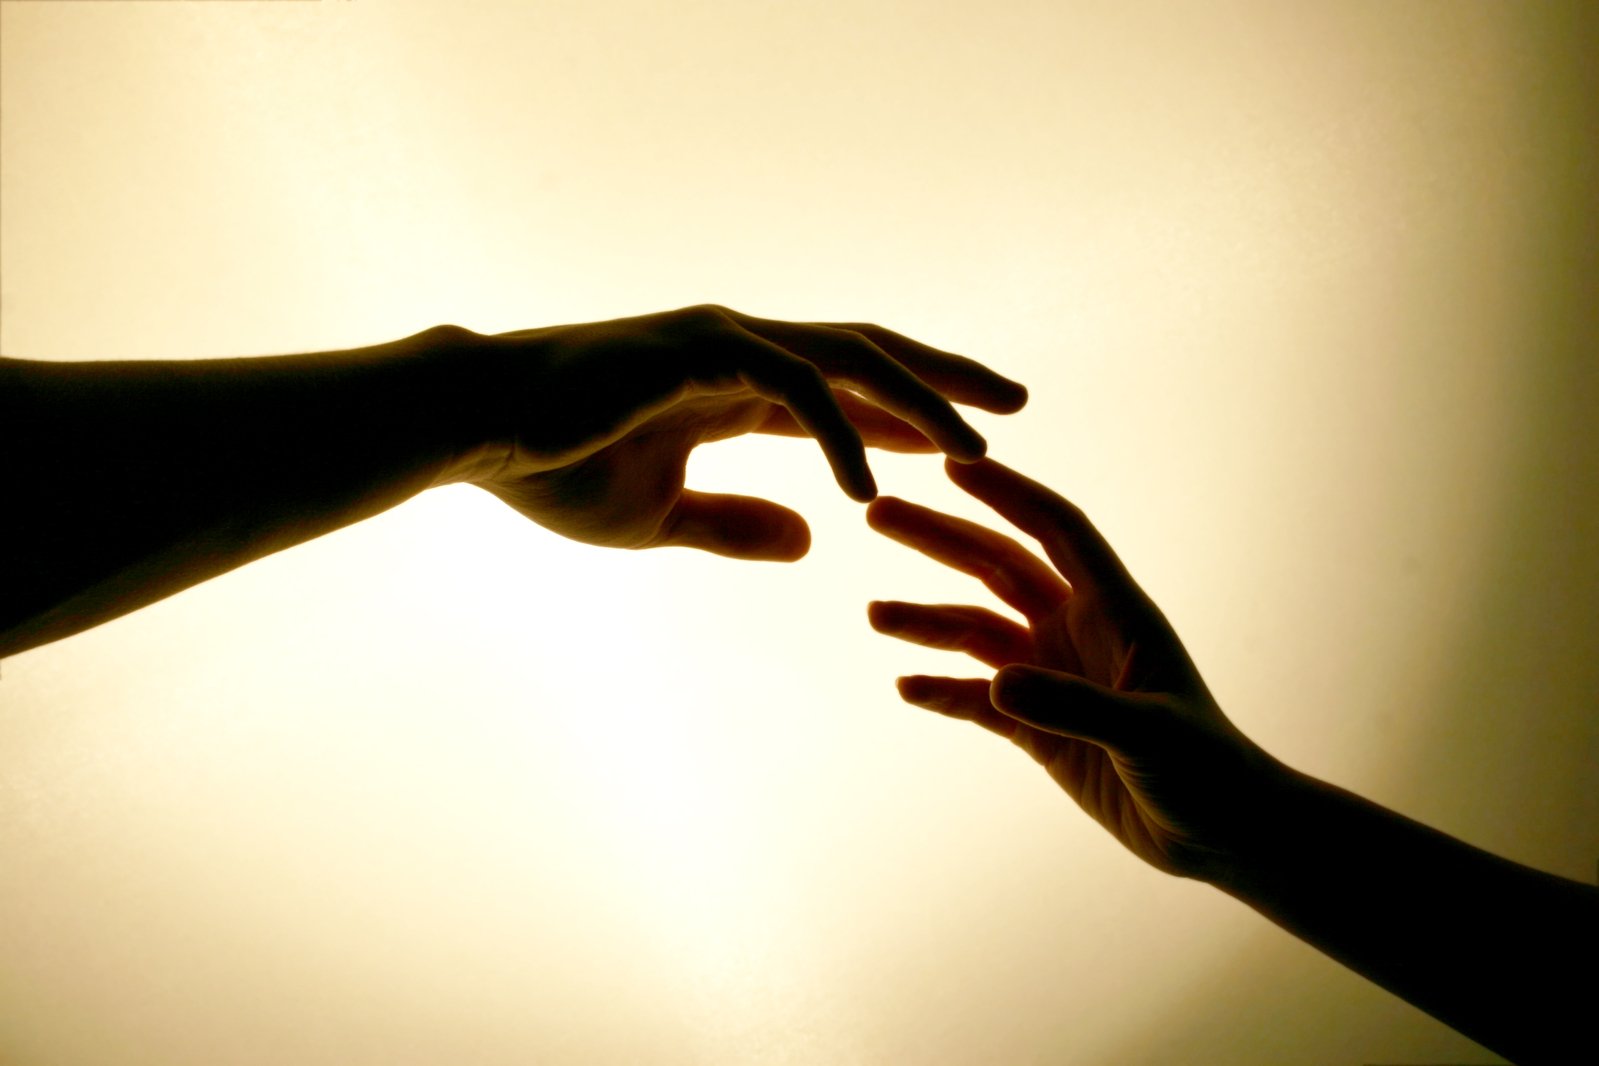 two people reaching out their arms towards each other